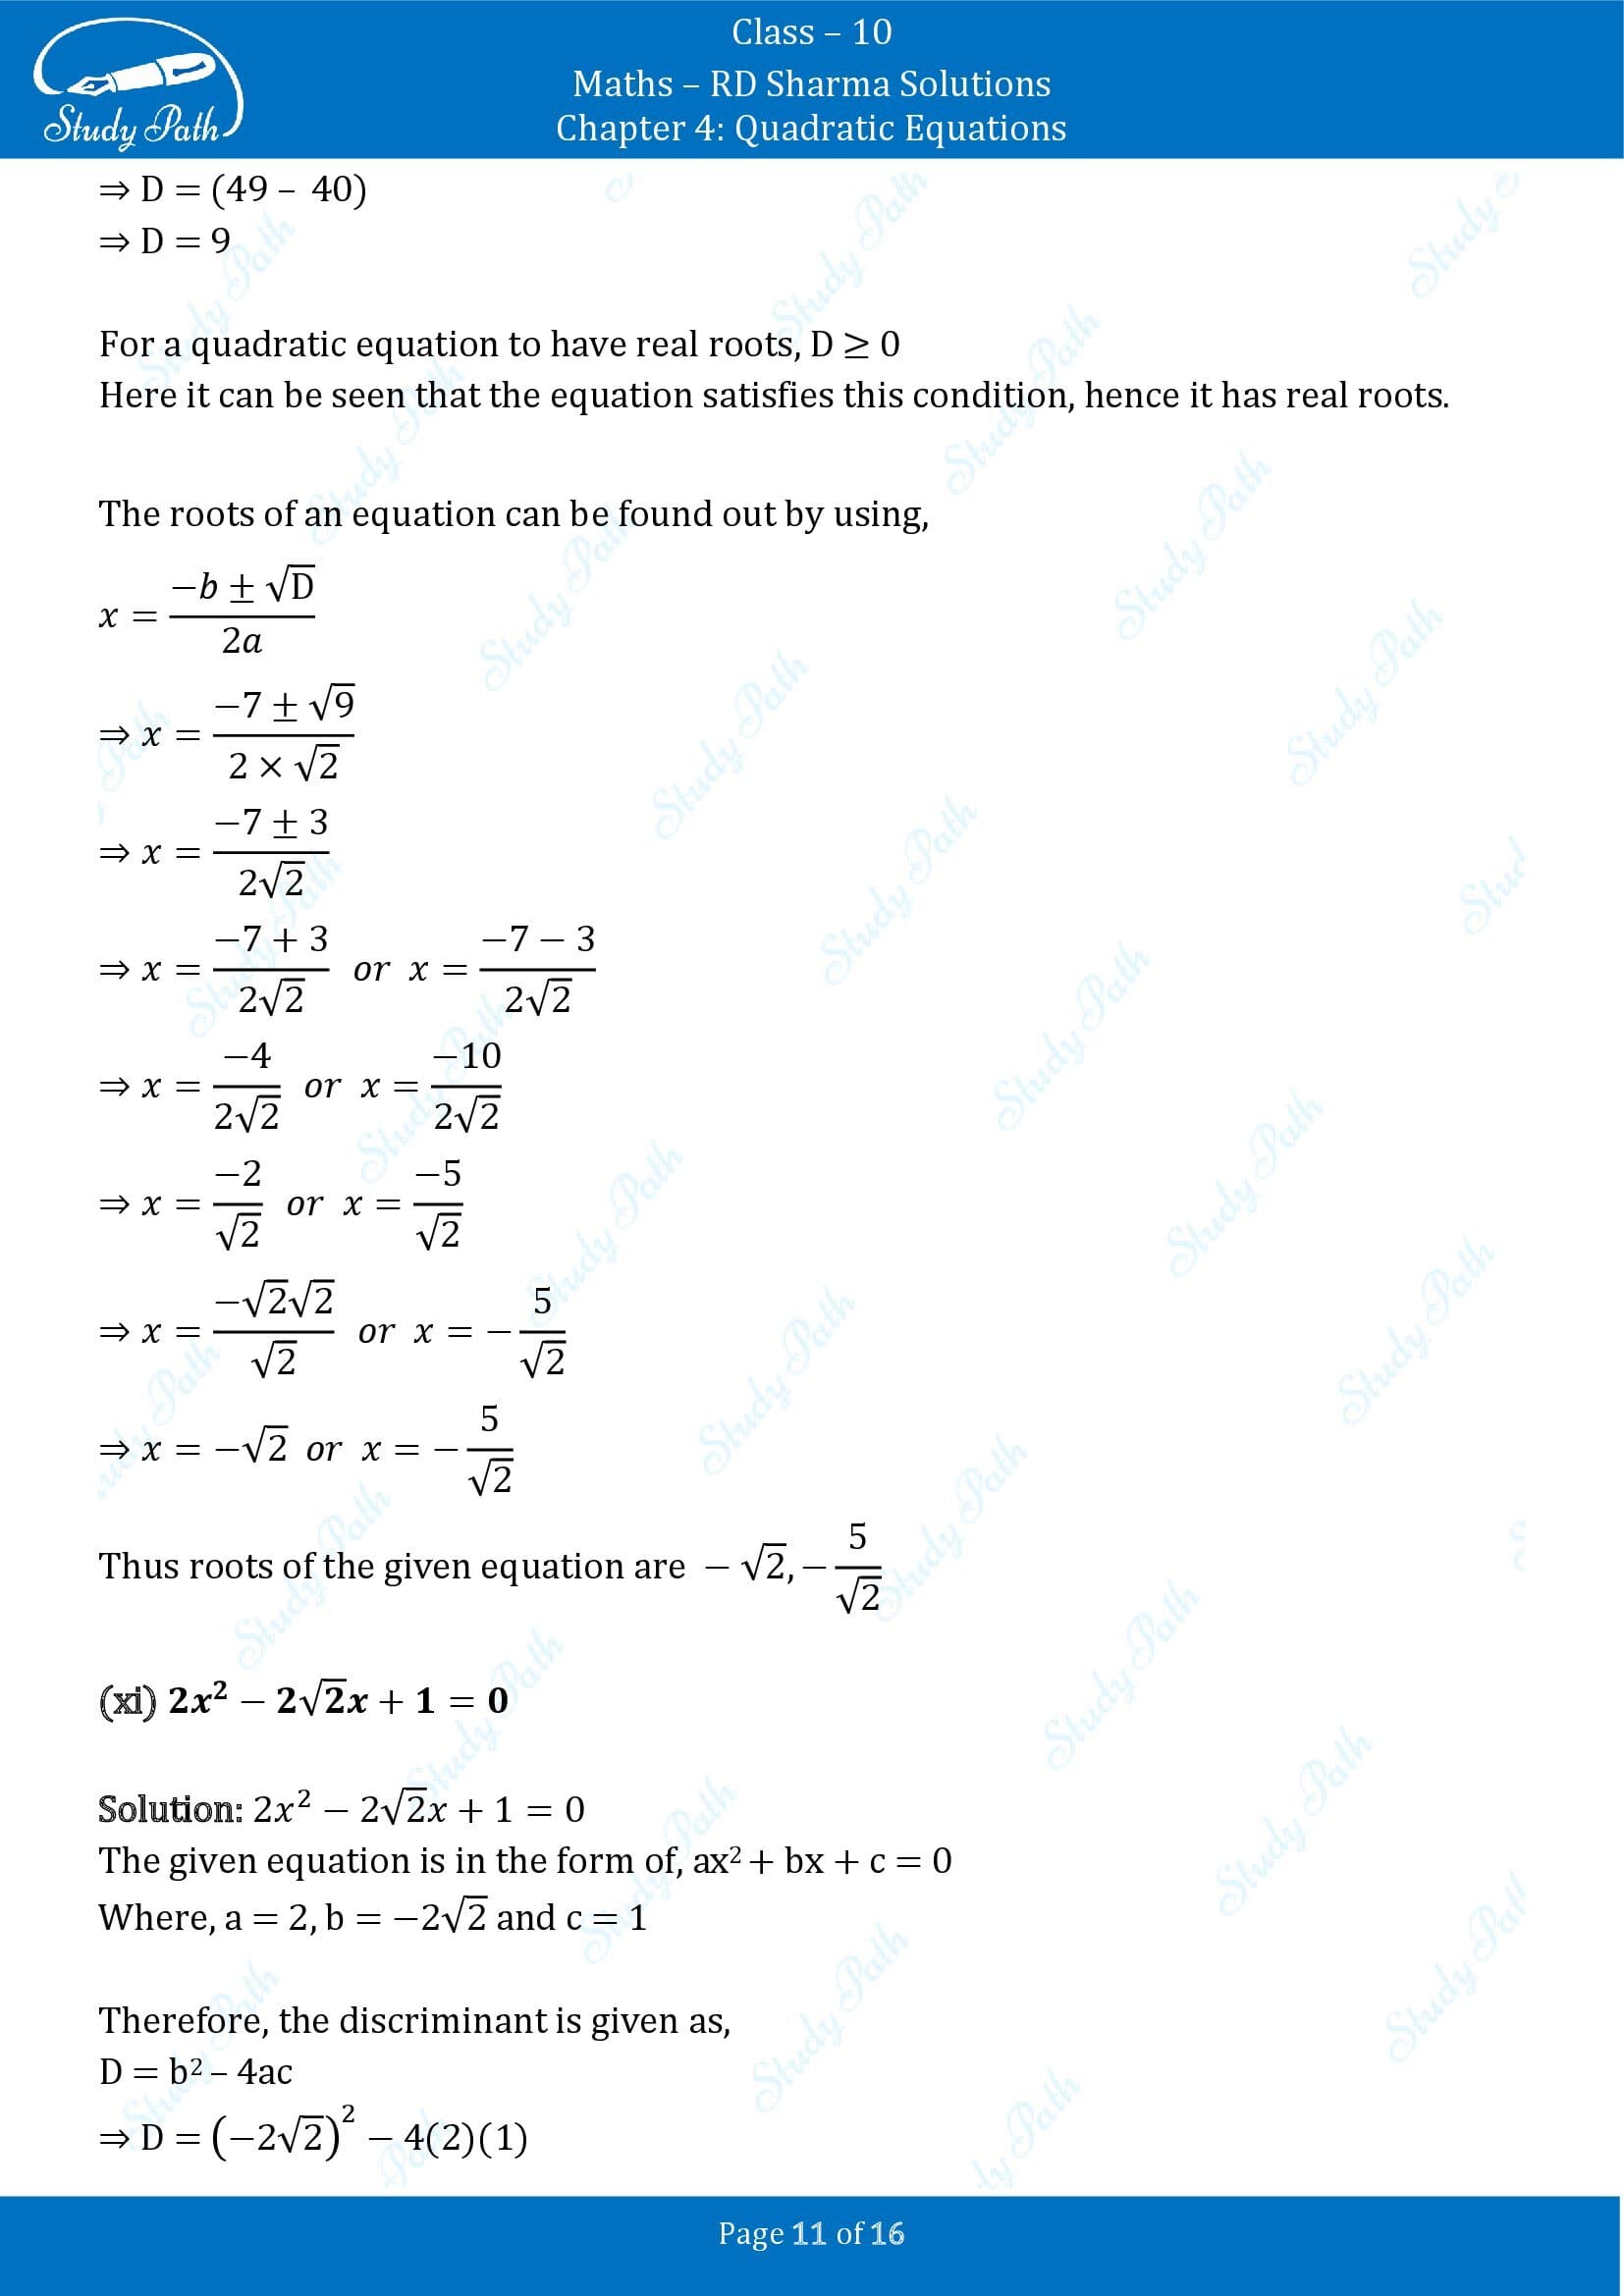 RD Sharma Solutions Class 10 Chapter 4 Quadratic Equations Exercise 4.5 00011